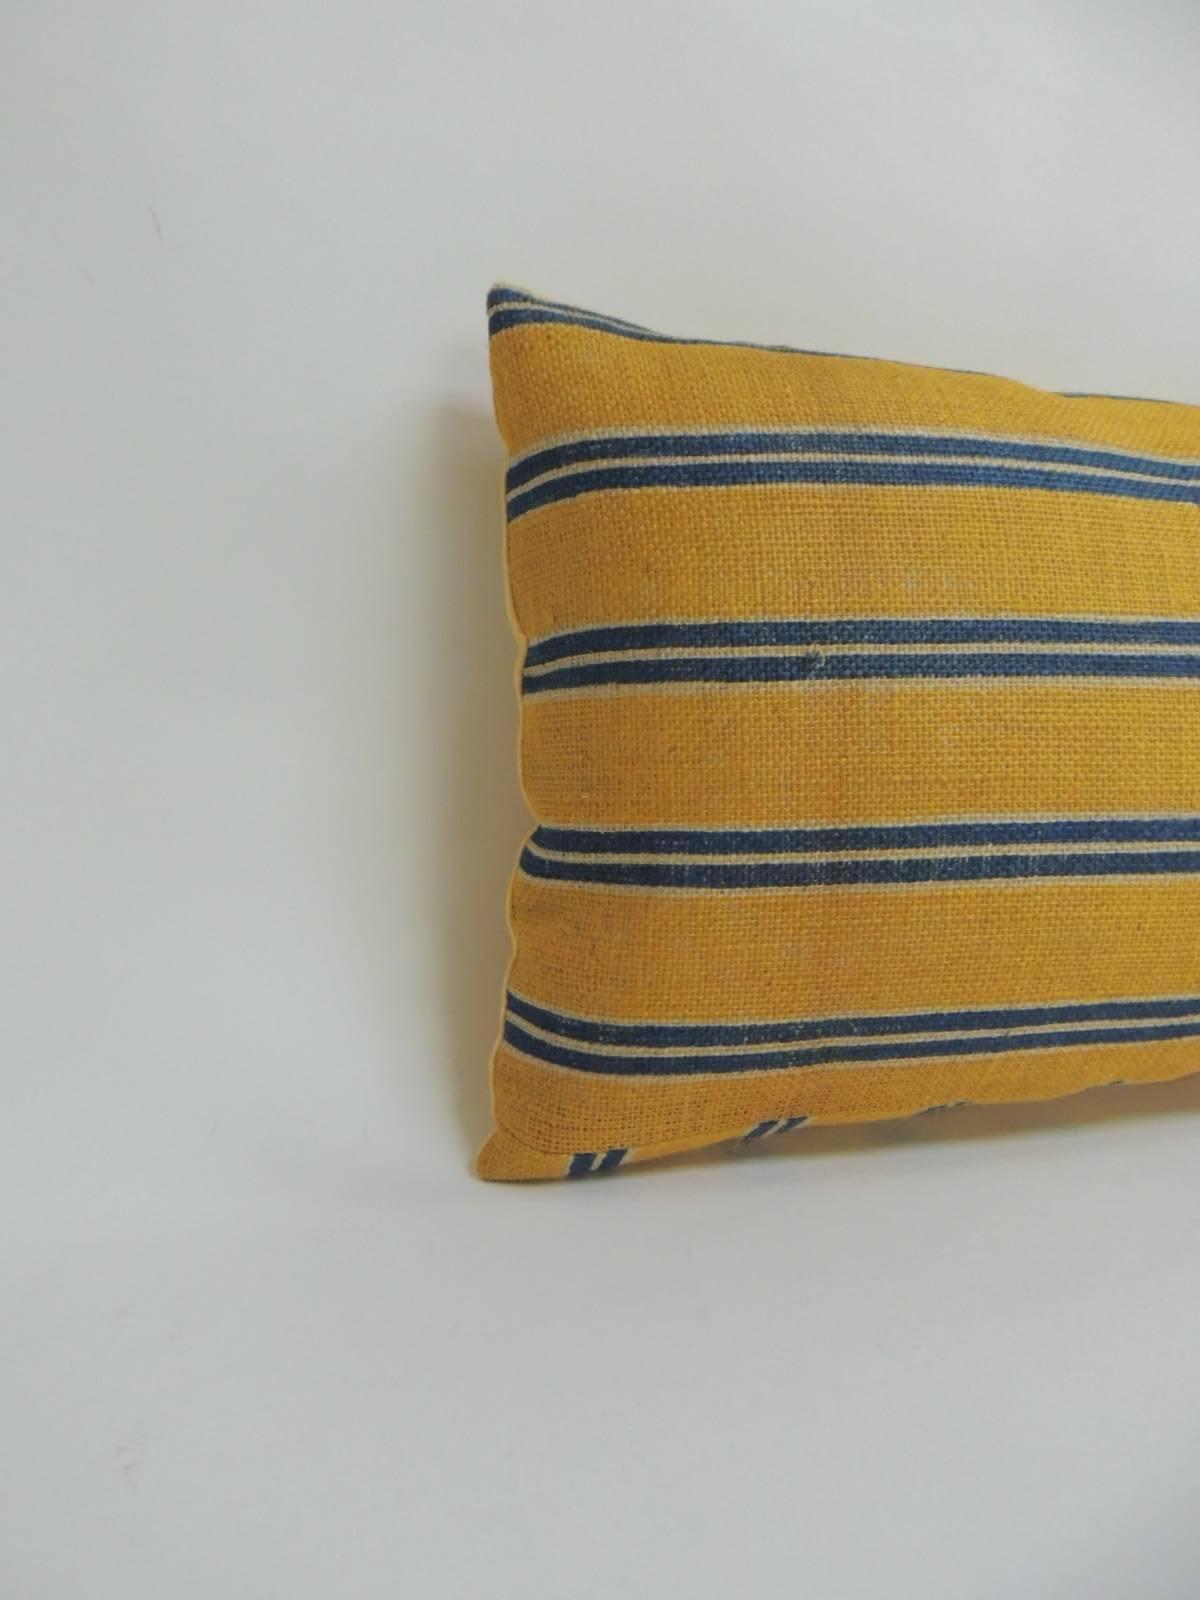 19th century French linen stripes in shades of blue and yellow on antique textile linen. Long bolster throw pillow finished with quilted yellow cotton backing.
Accent bolster pillow hand-crafted and designed in the USA. Throw bolster pillow with